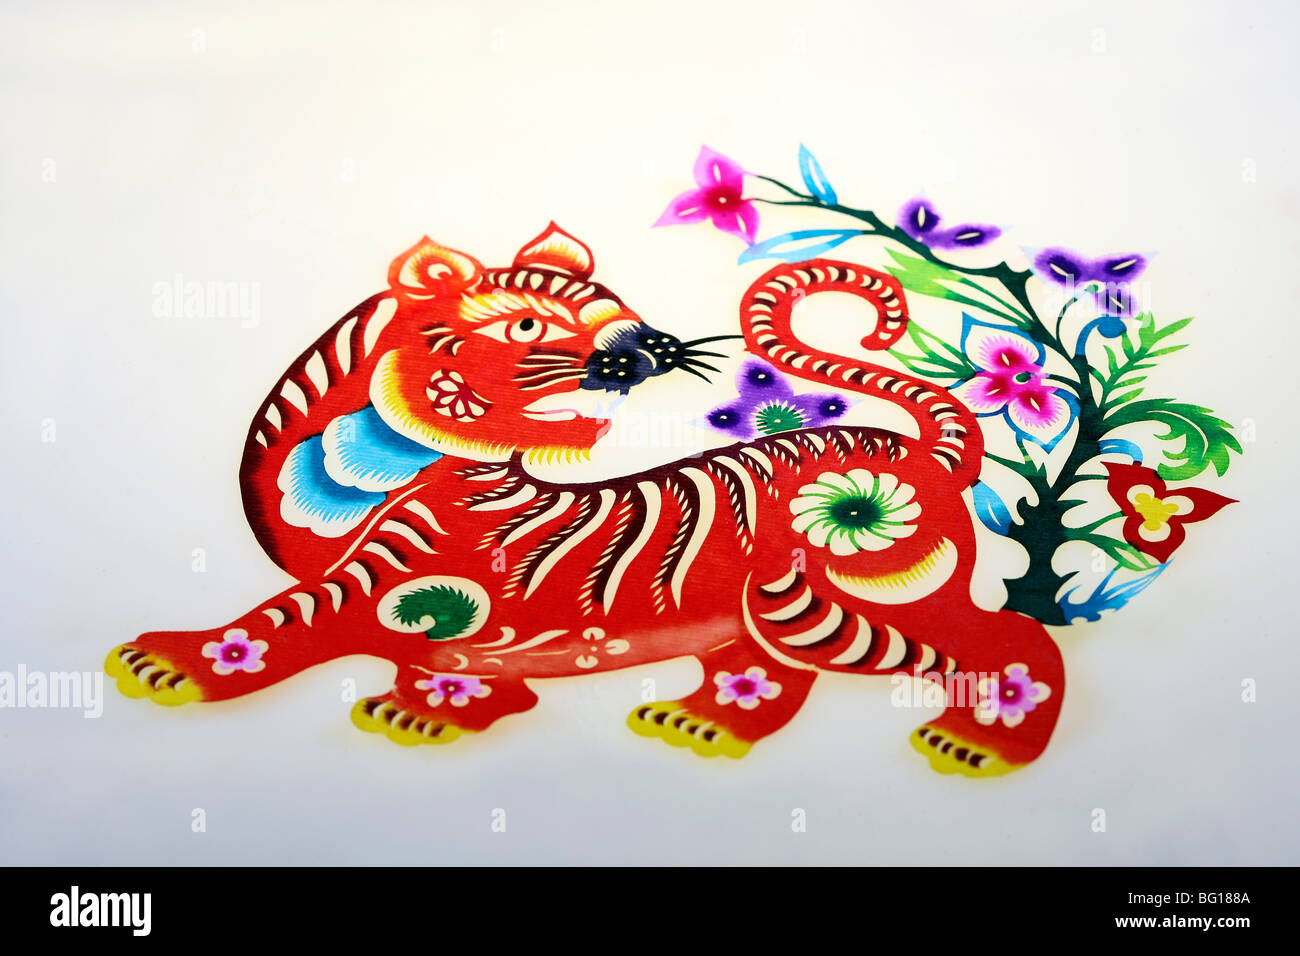 100-tiger paper-cutting scroll made to greet year of the tiger-Rednet